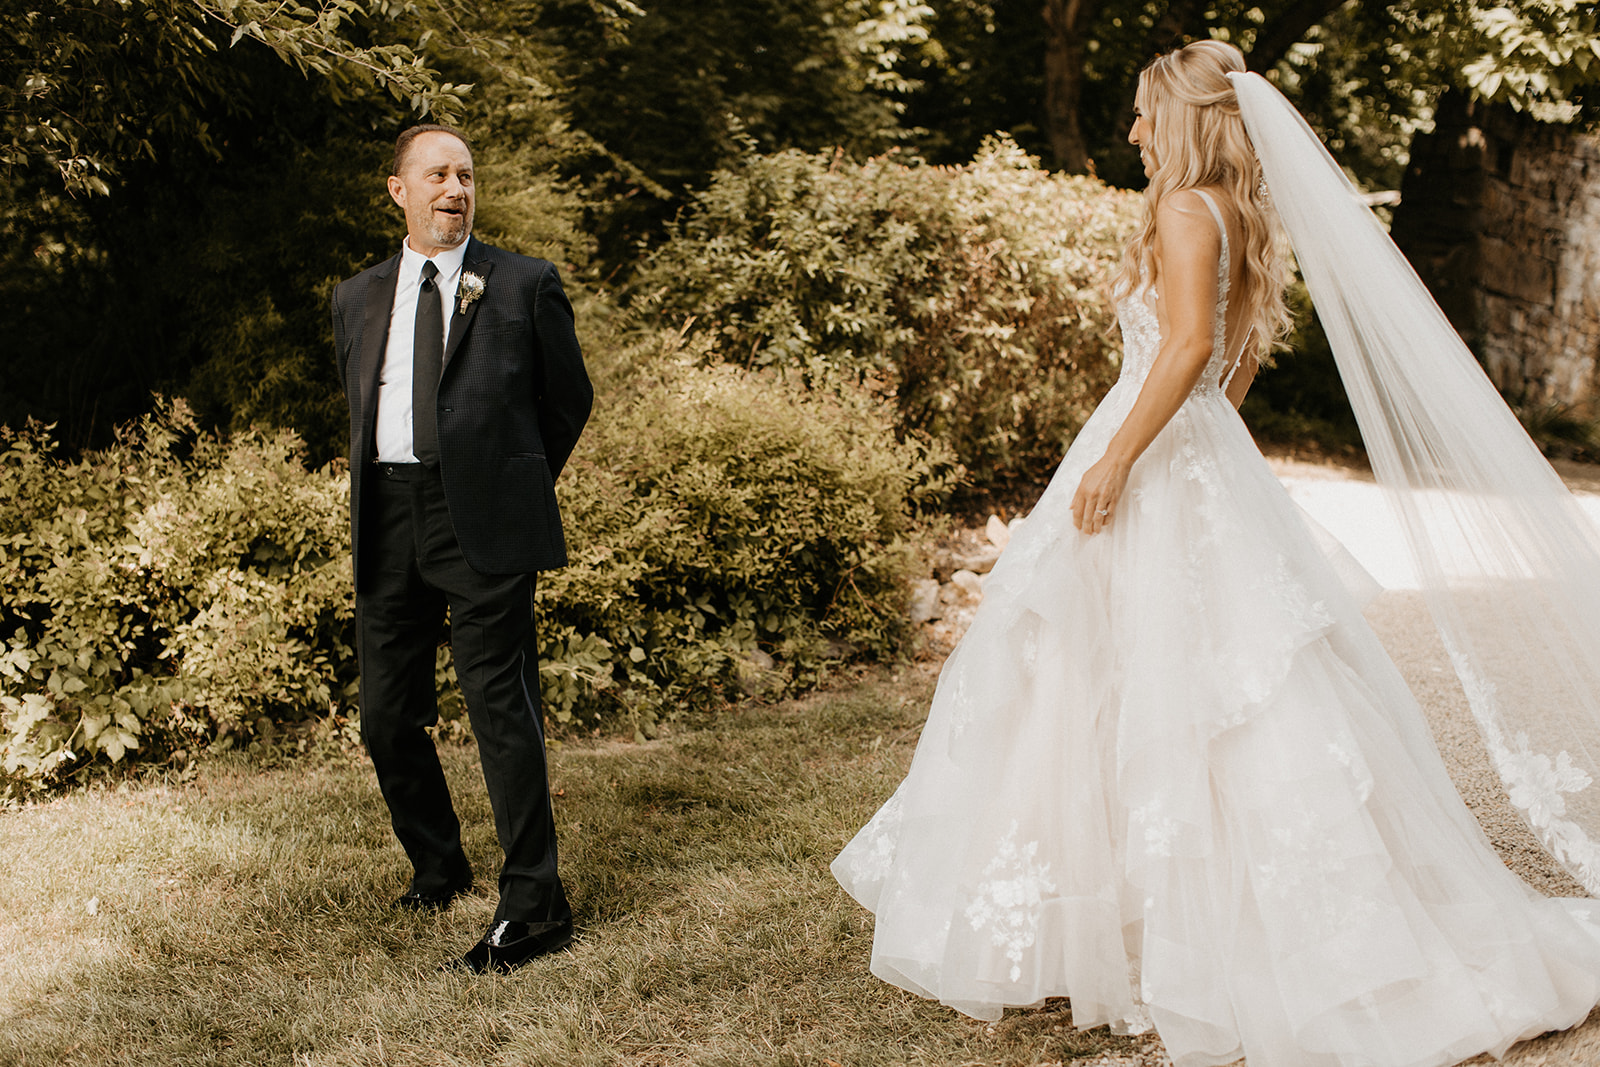 Bride shares first look with her dad